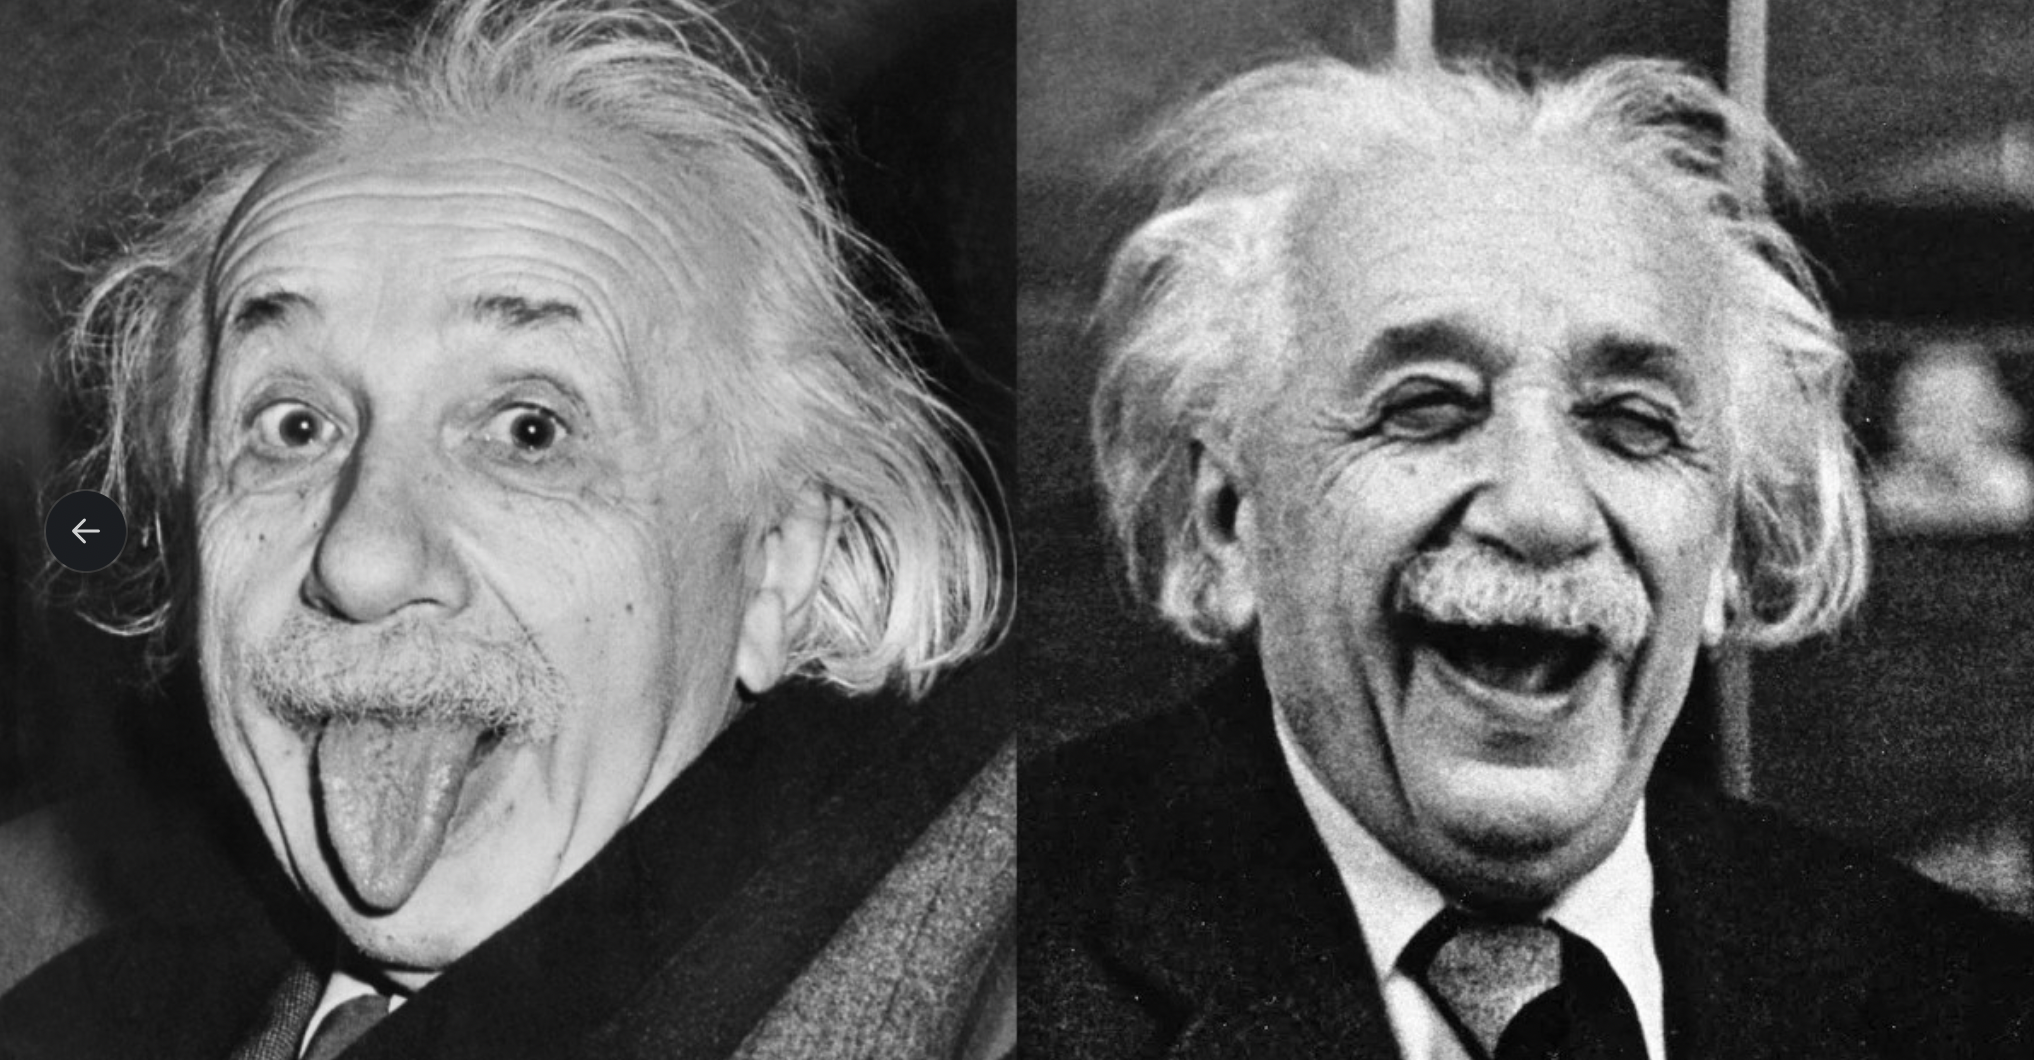 A black and white photo of albert einstein with his tongue out.